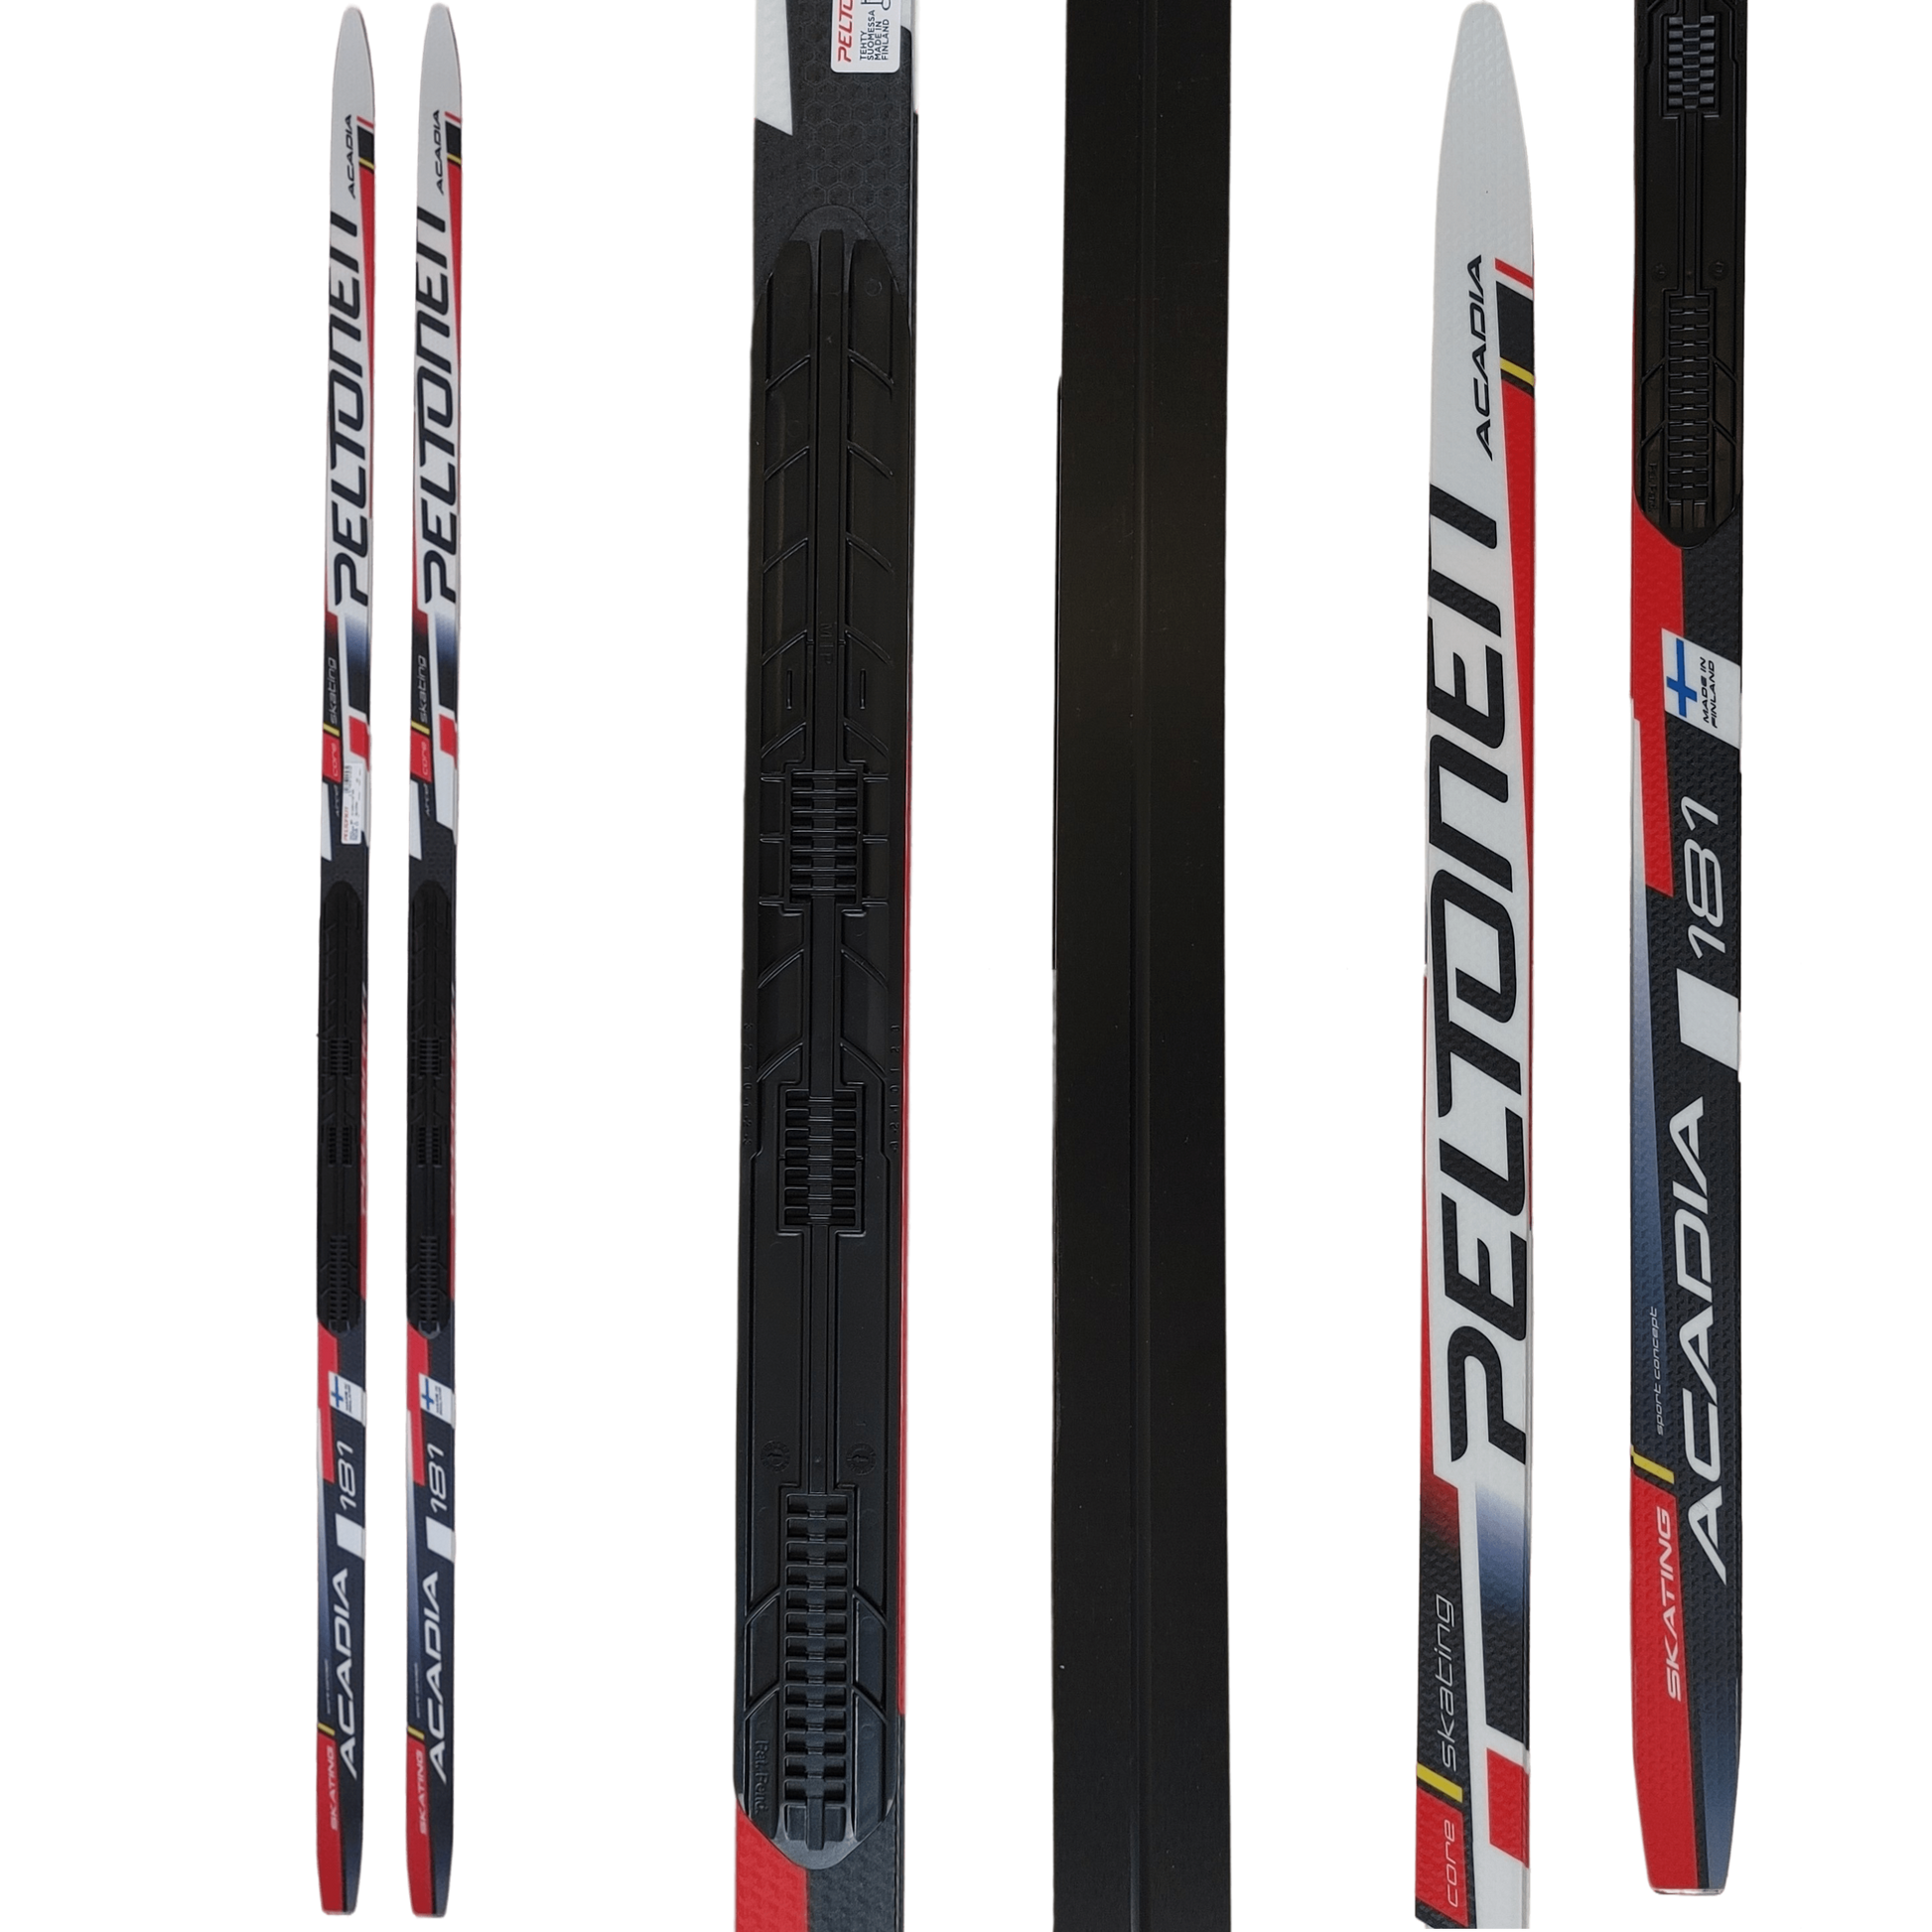 A product picture of the Peltonen ACADIA CAP 2016 Skate Skis B-GRADE MINOR DEFECTS